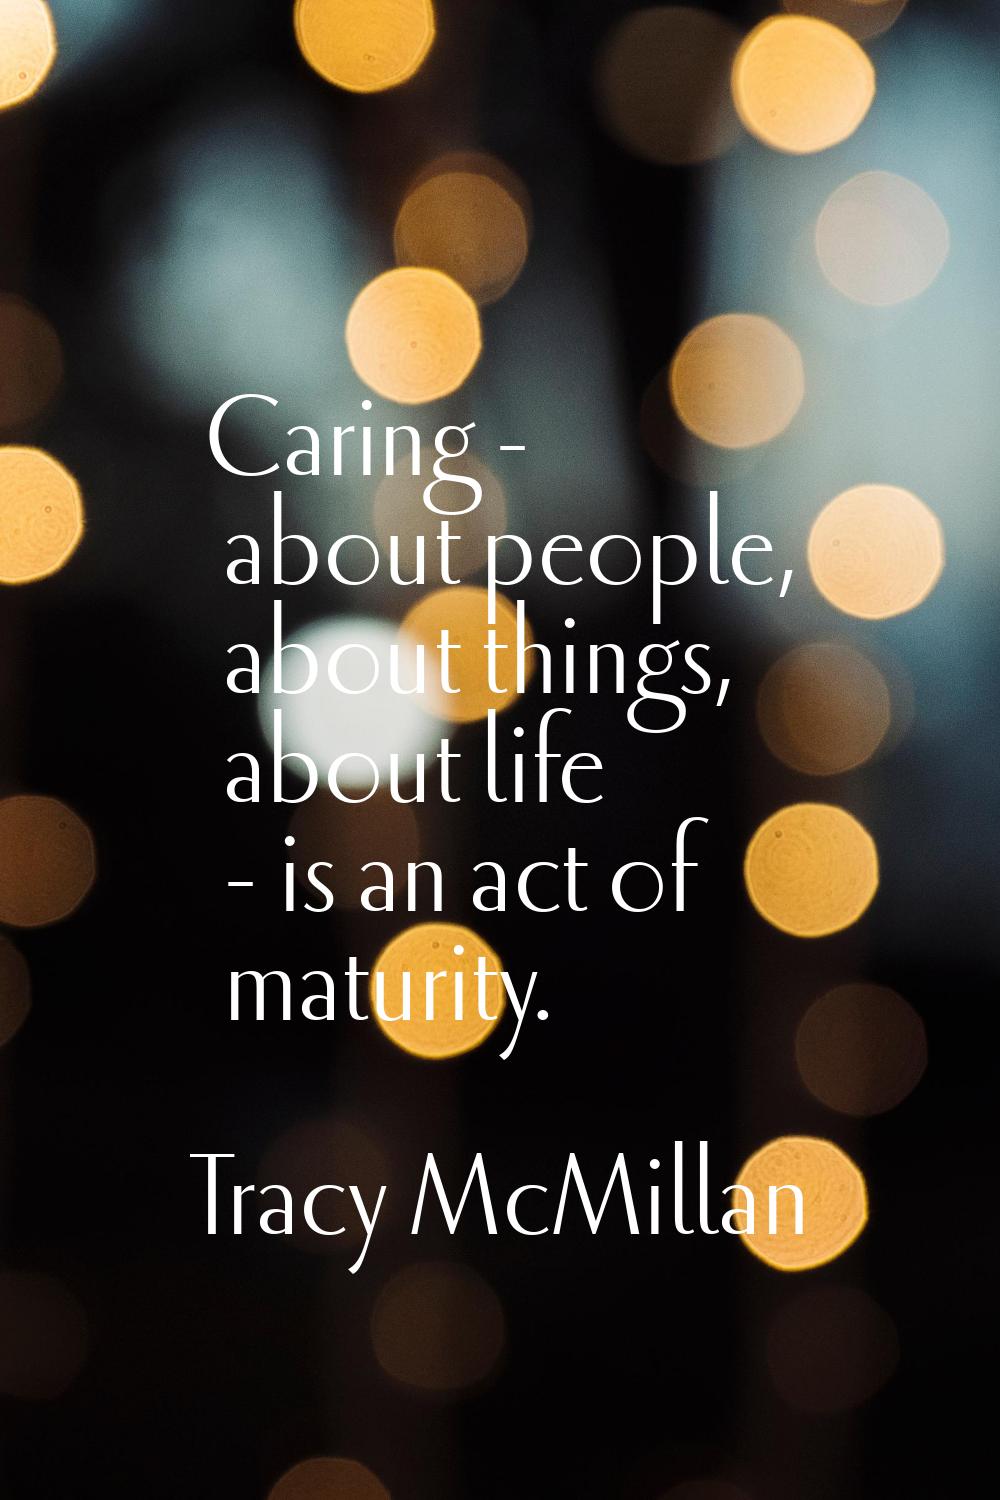 Caring - about people, about things, about life - is an act of maturity.